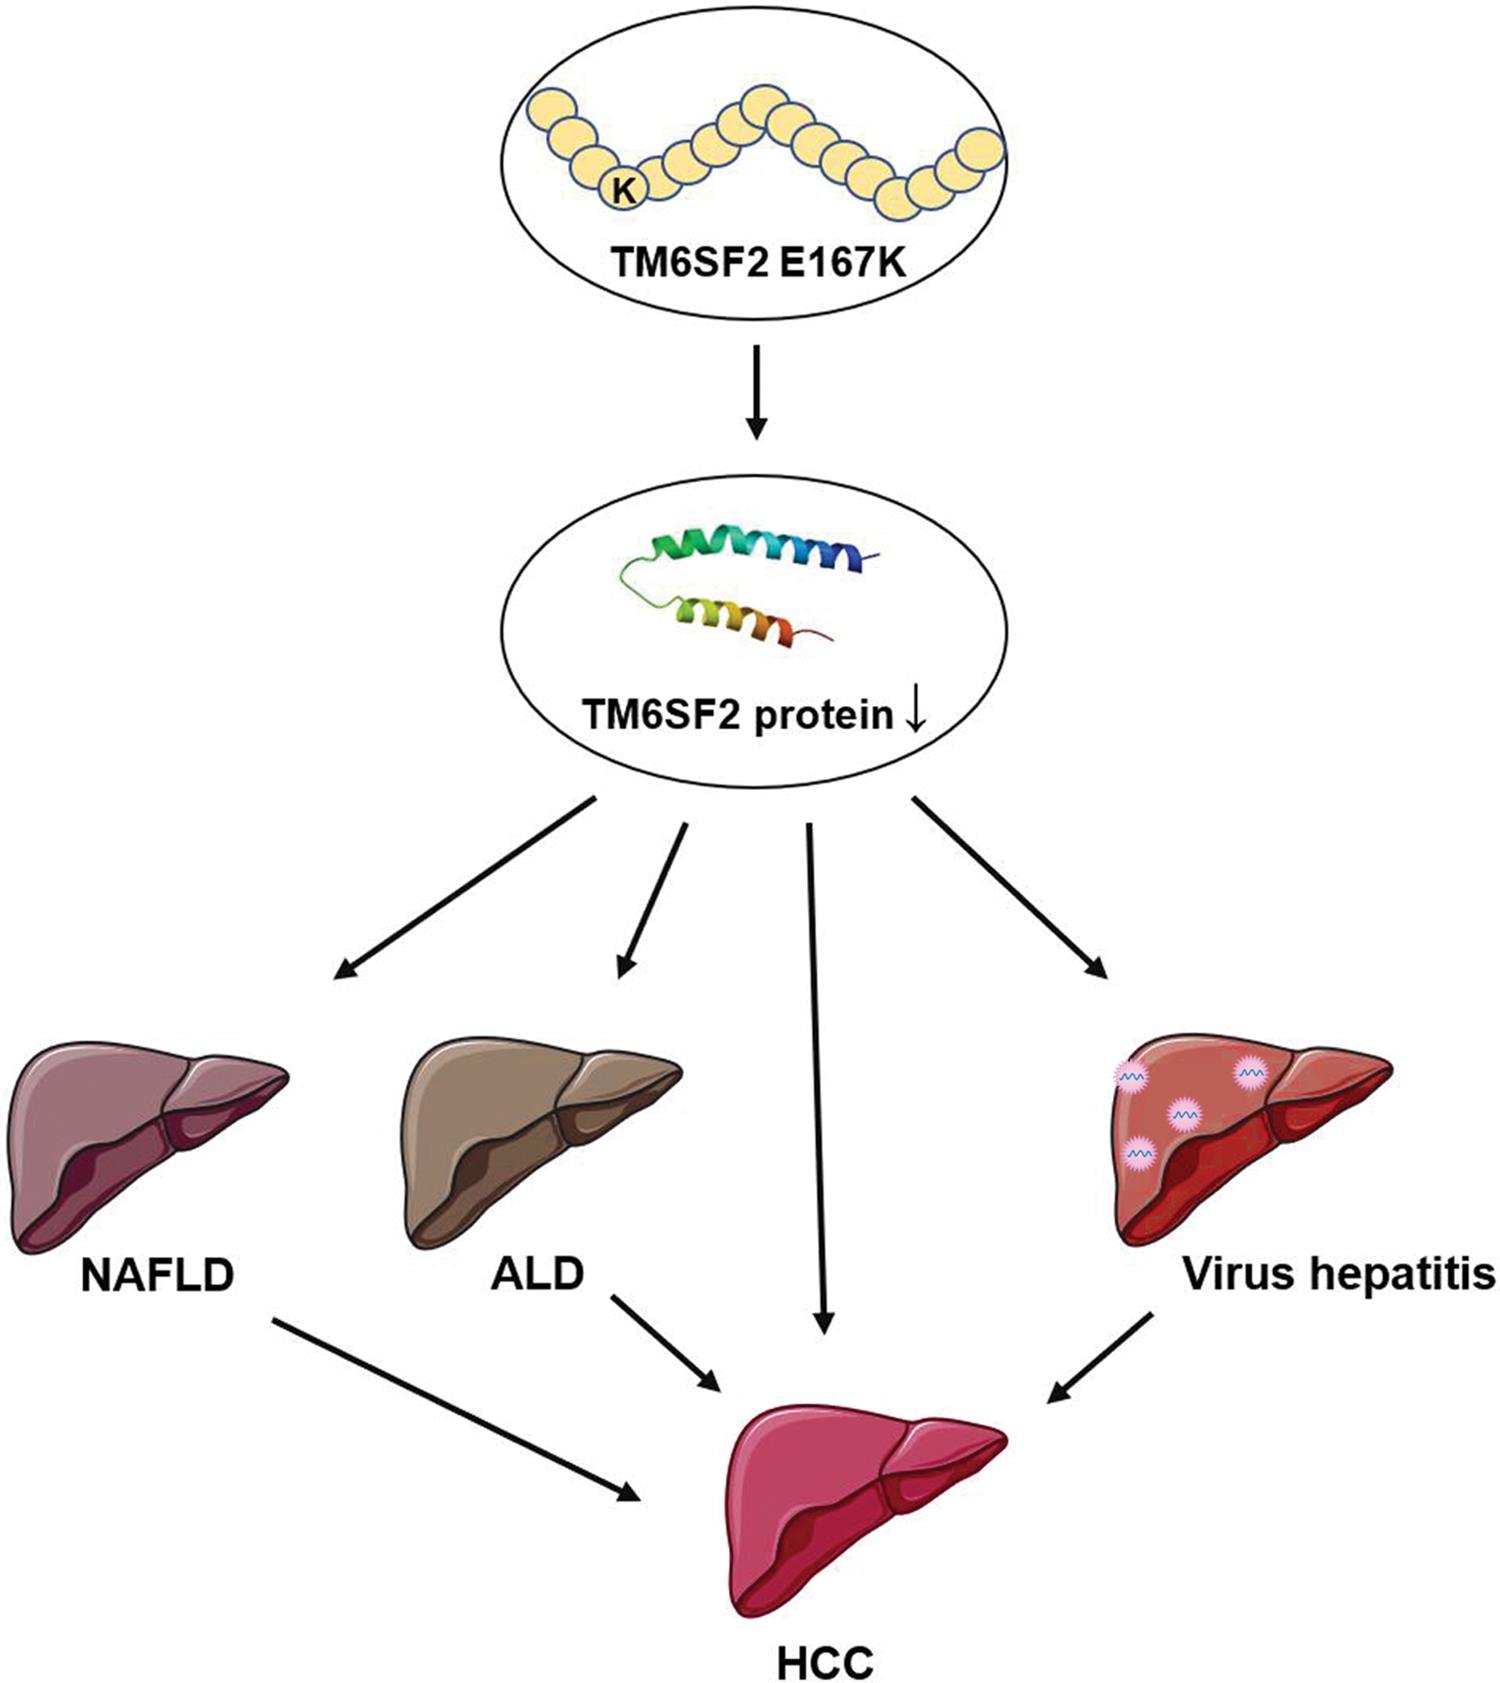 The potential mechanism of <italic>TM6SF2</italic> E167K in clinical liver diseases.